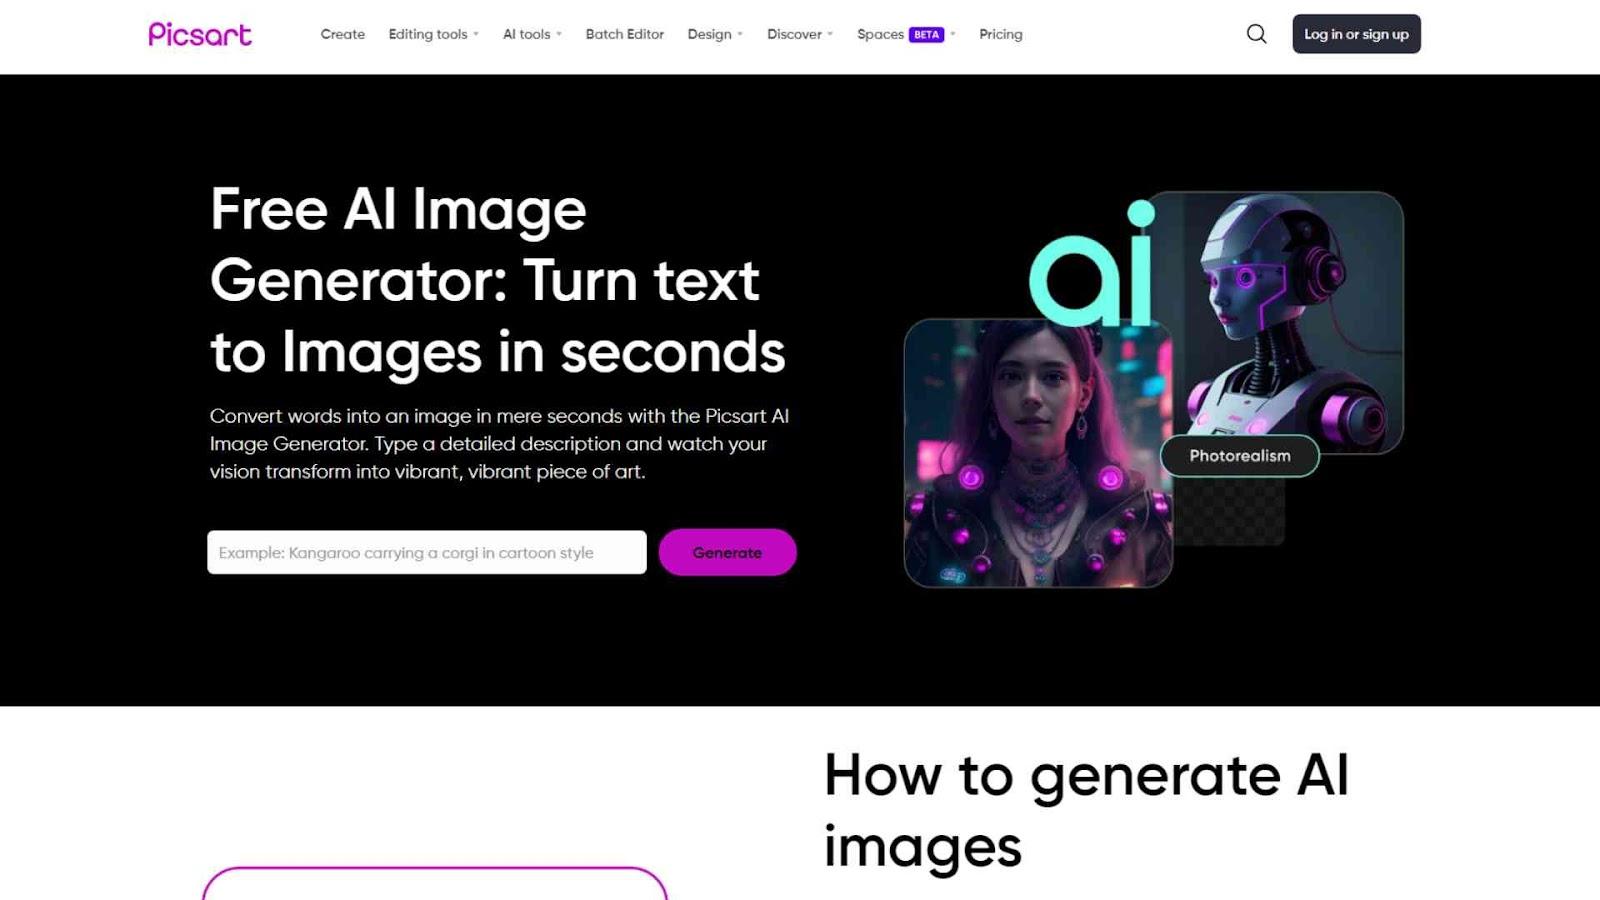 Generate AI Images using descriptions of each character from